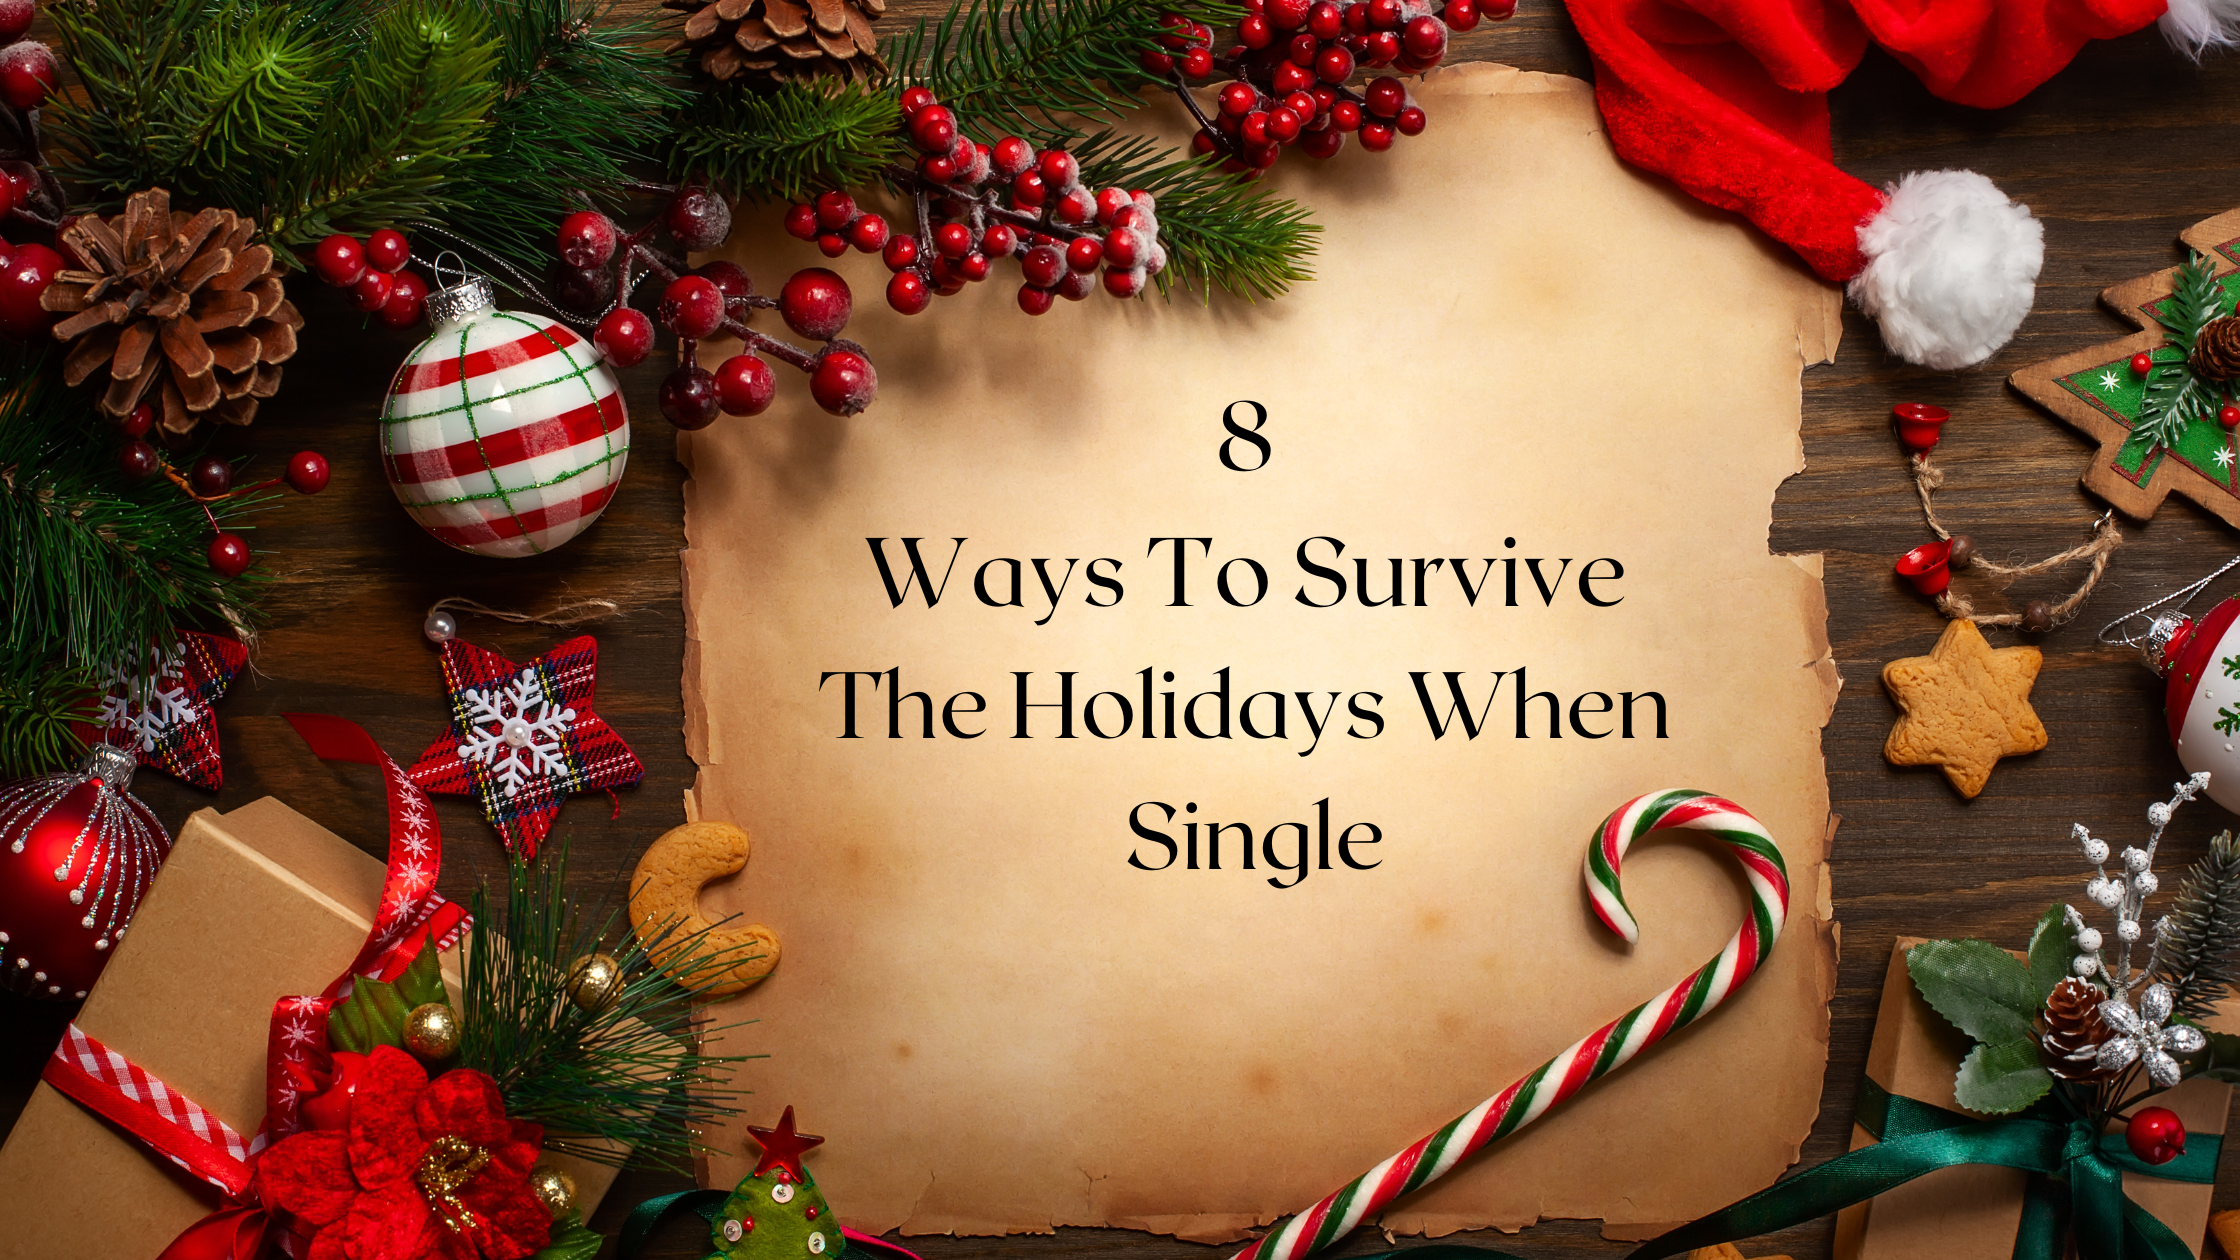 8 Ways To Survive The Holidays When Single